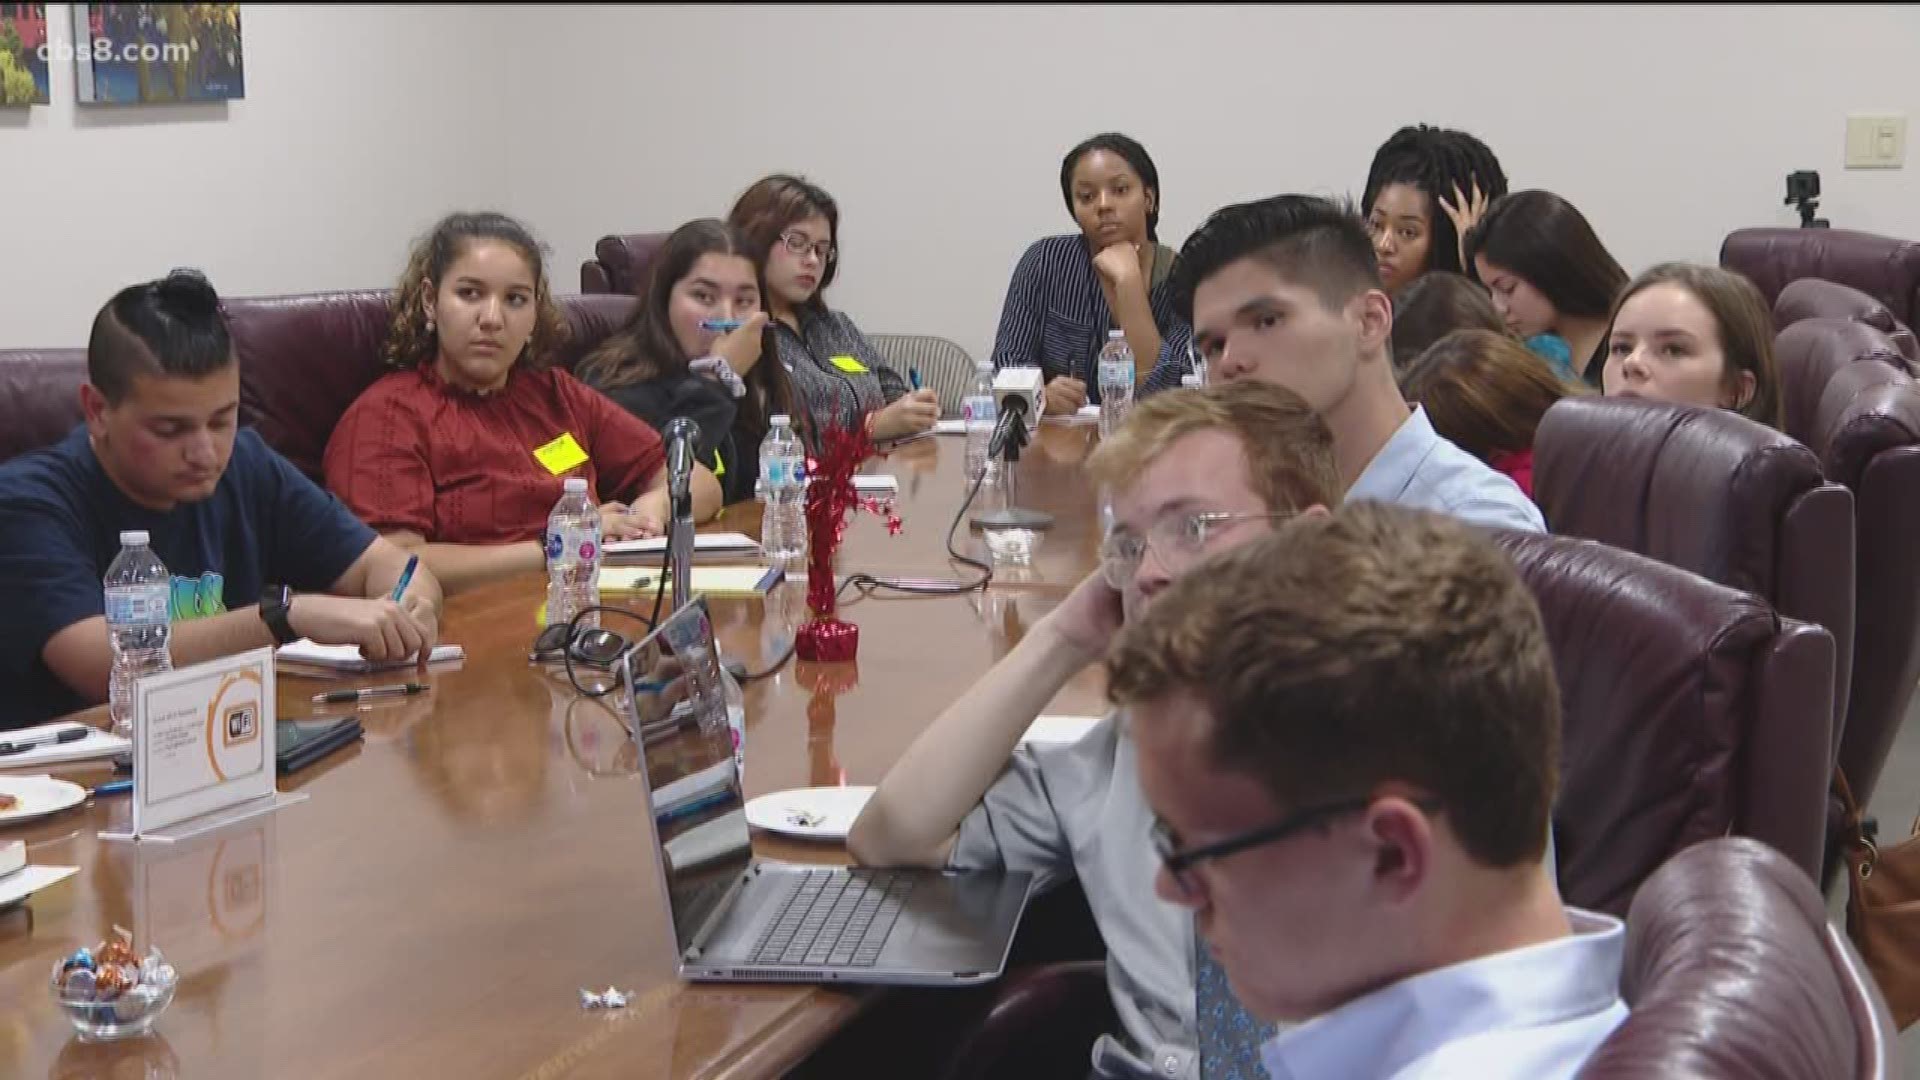 News 8 invited a group of soon to be first-time voters to watch Tuesday’s Democratic debate.